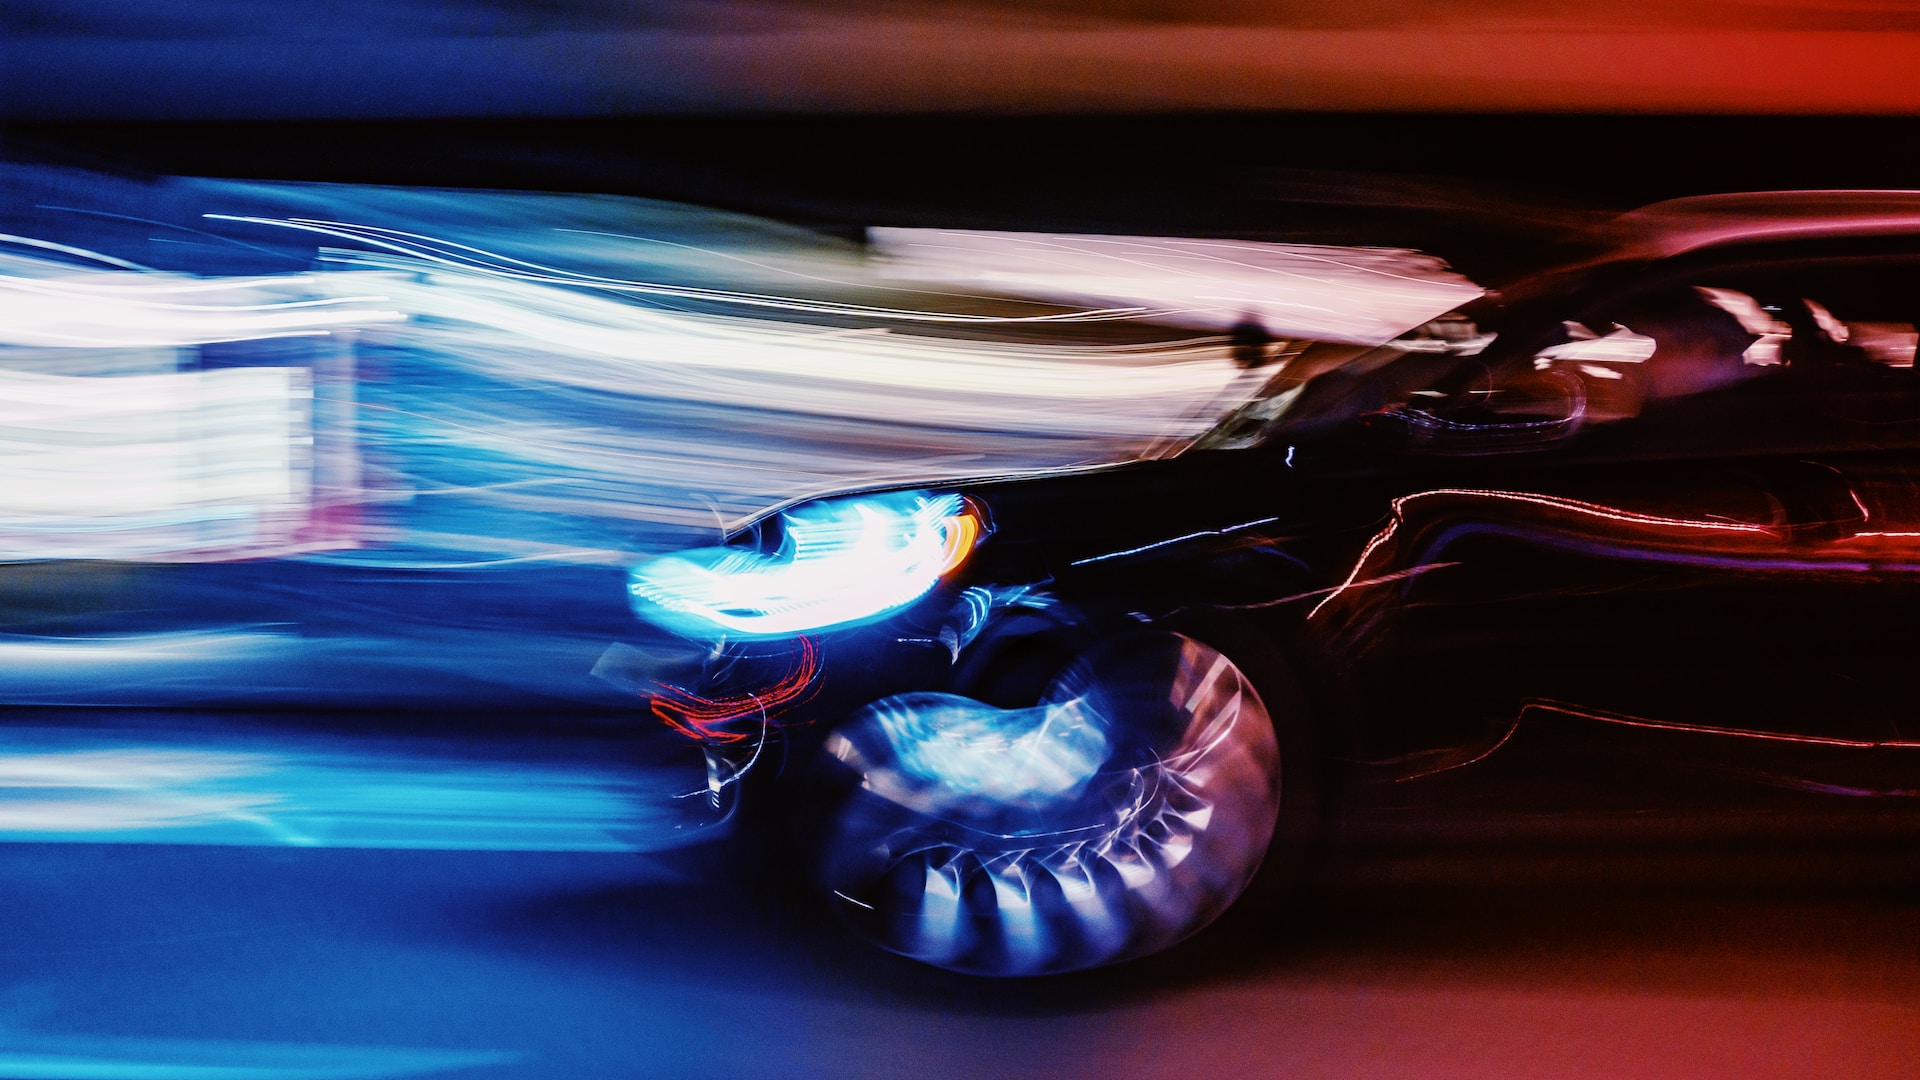 A blurred image of a car